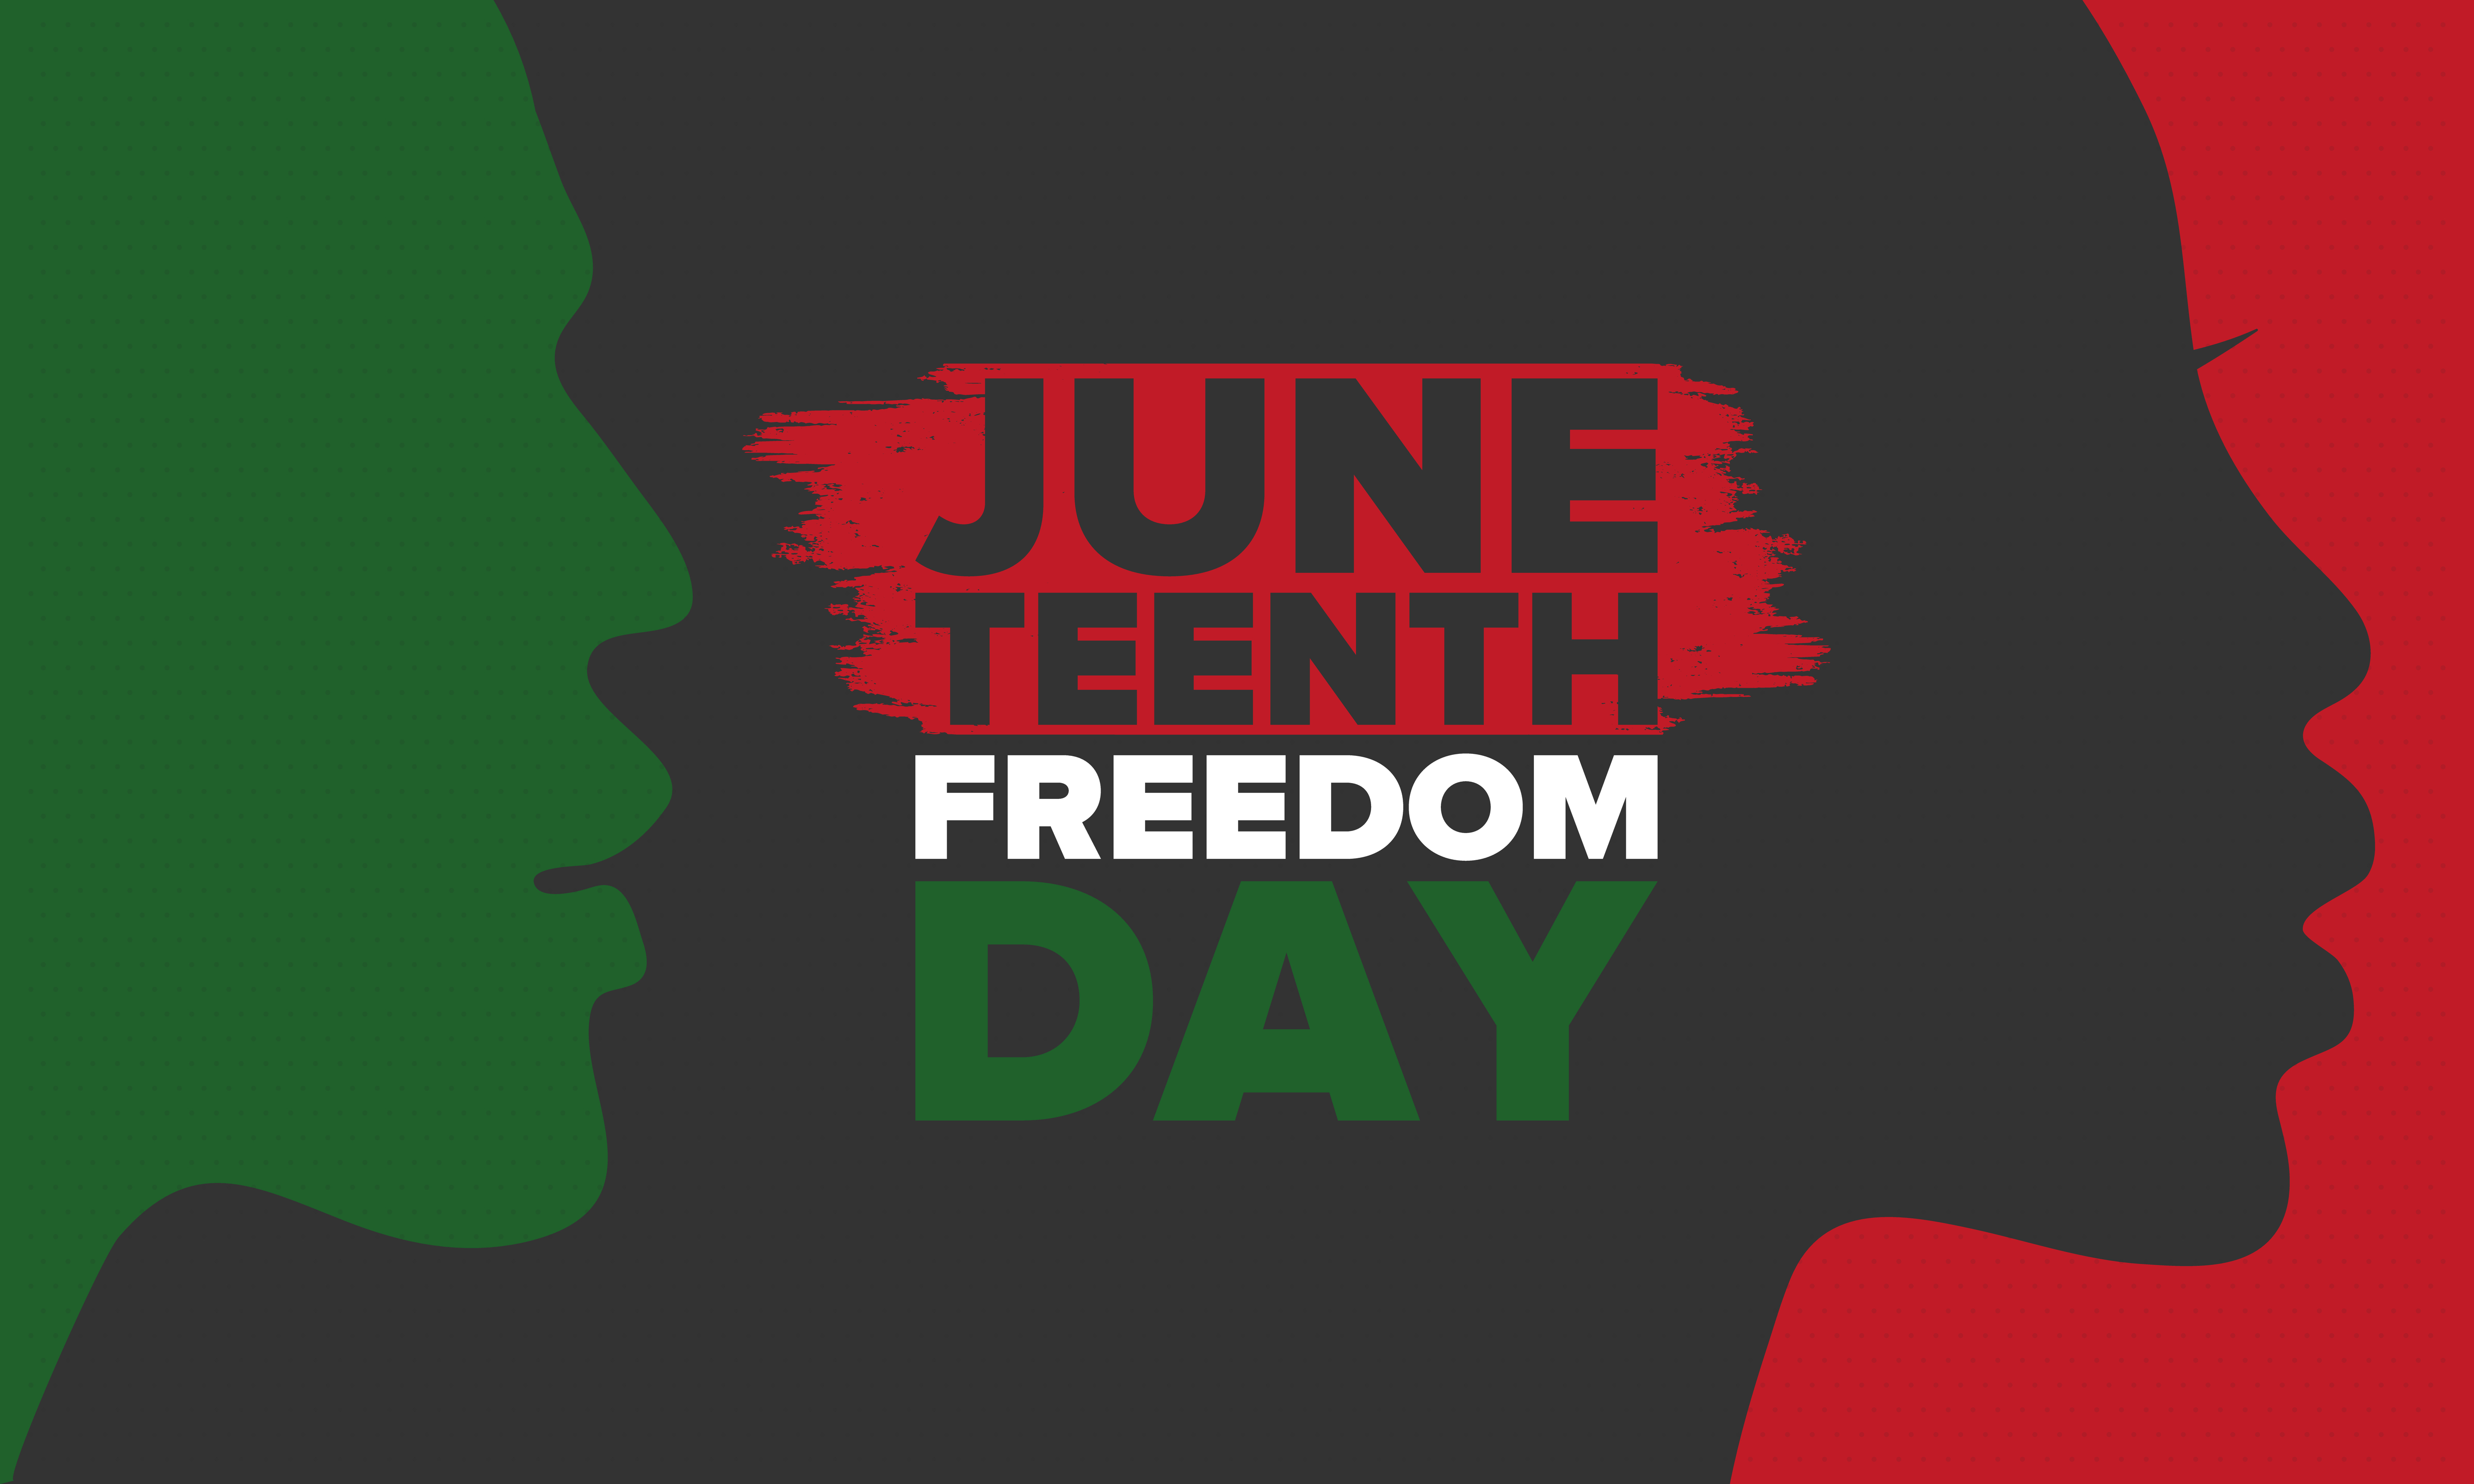 Green, black and red background with Juneteenth freedom day written in the black section